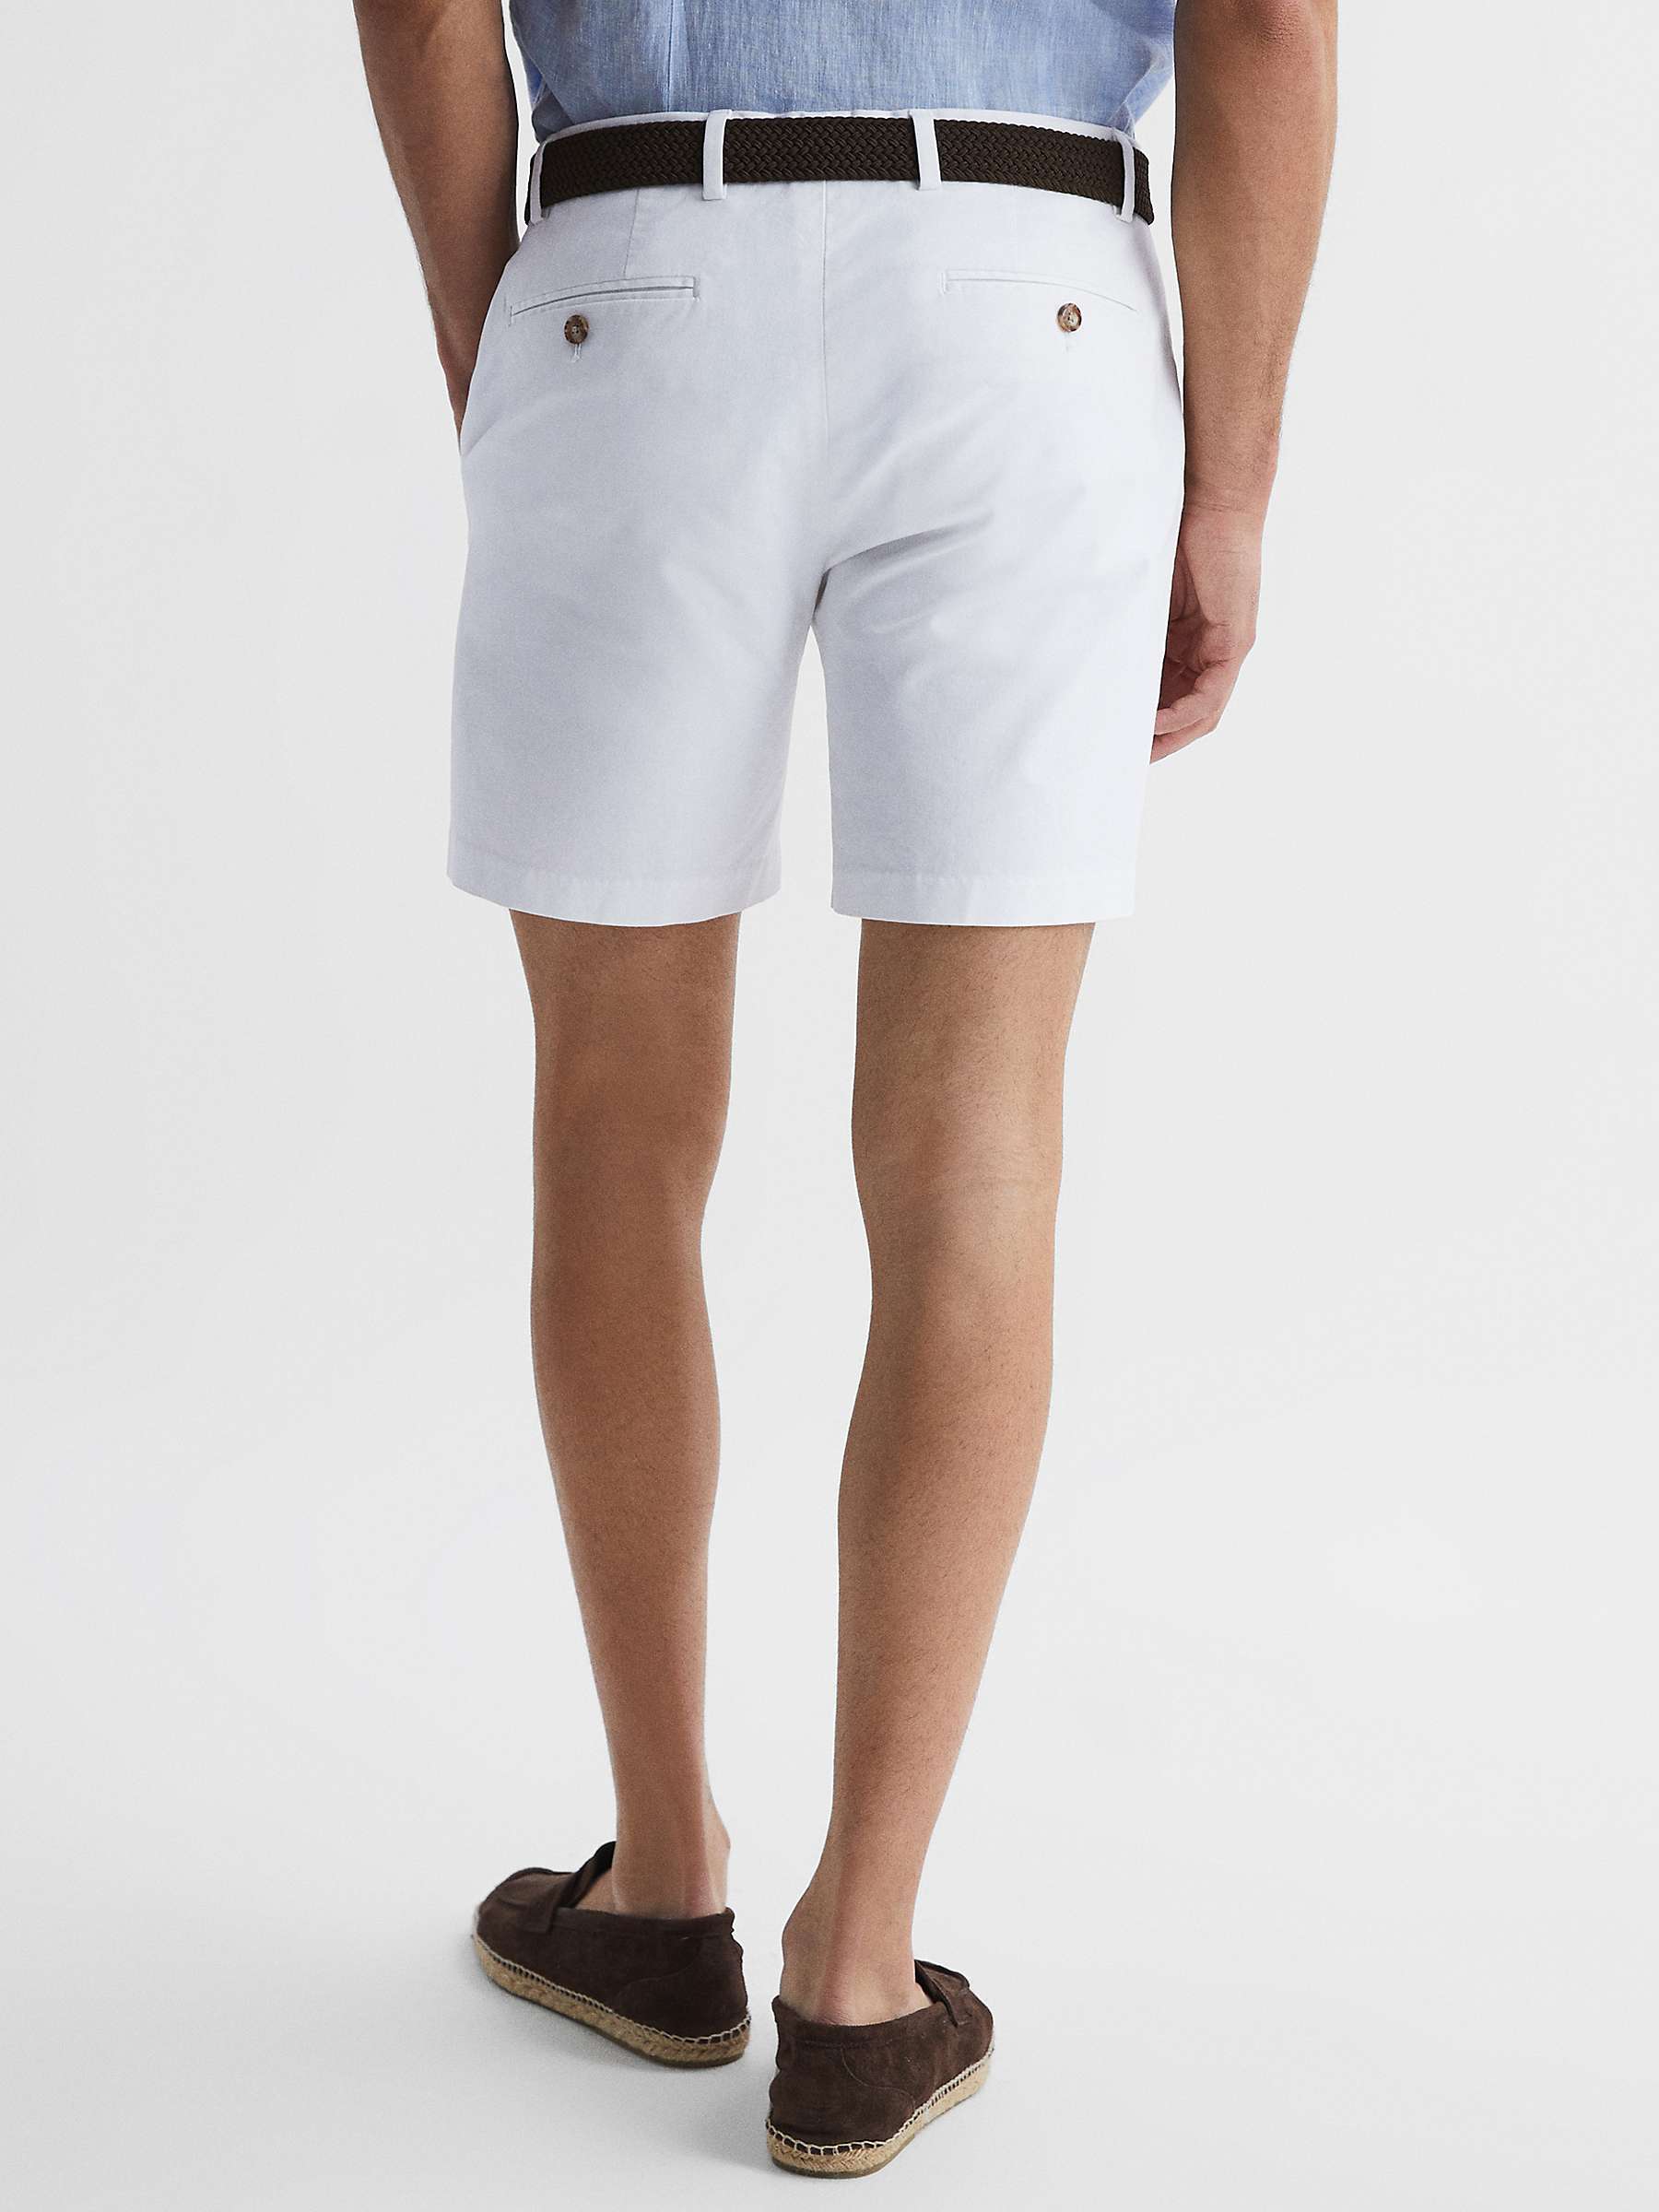 Reiss Wicket Casual Chino Shorts, White at John Lewis & Partners